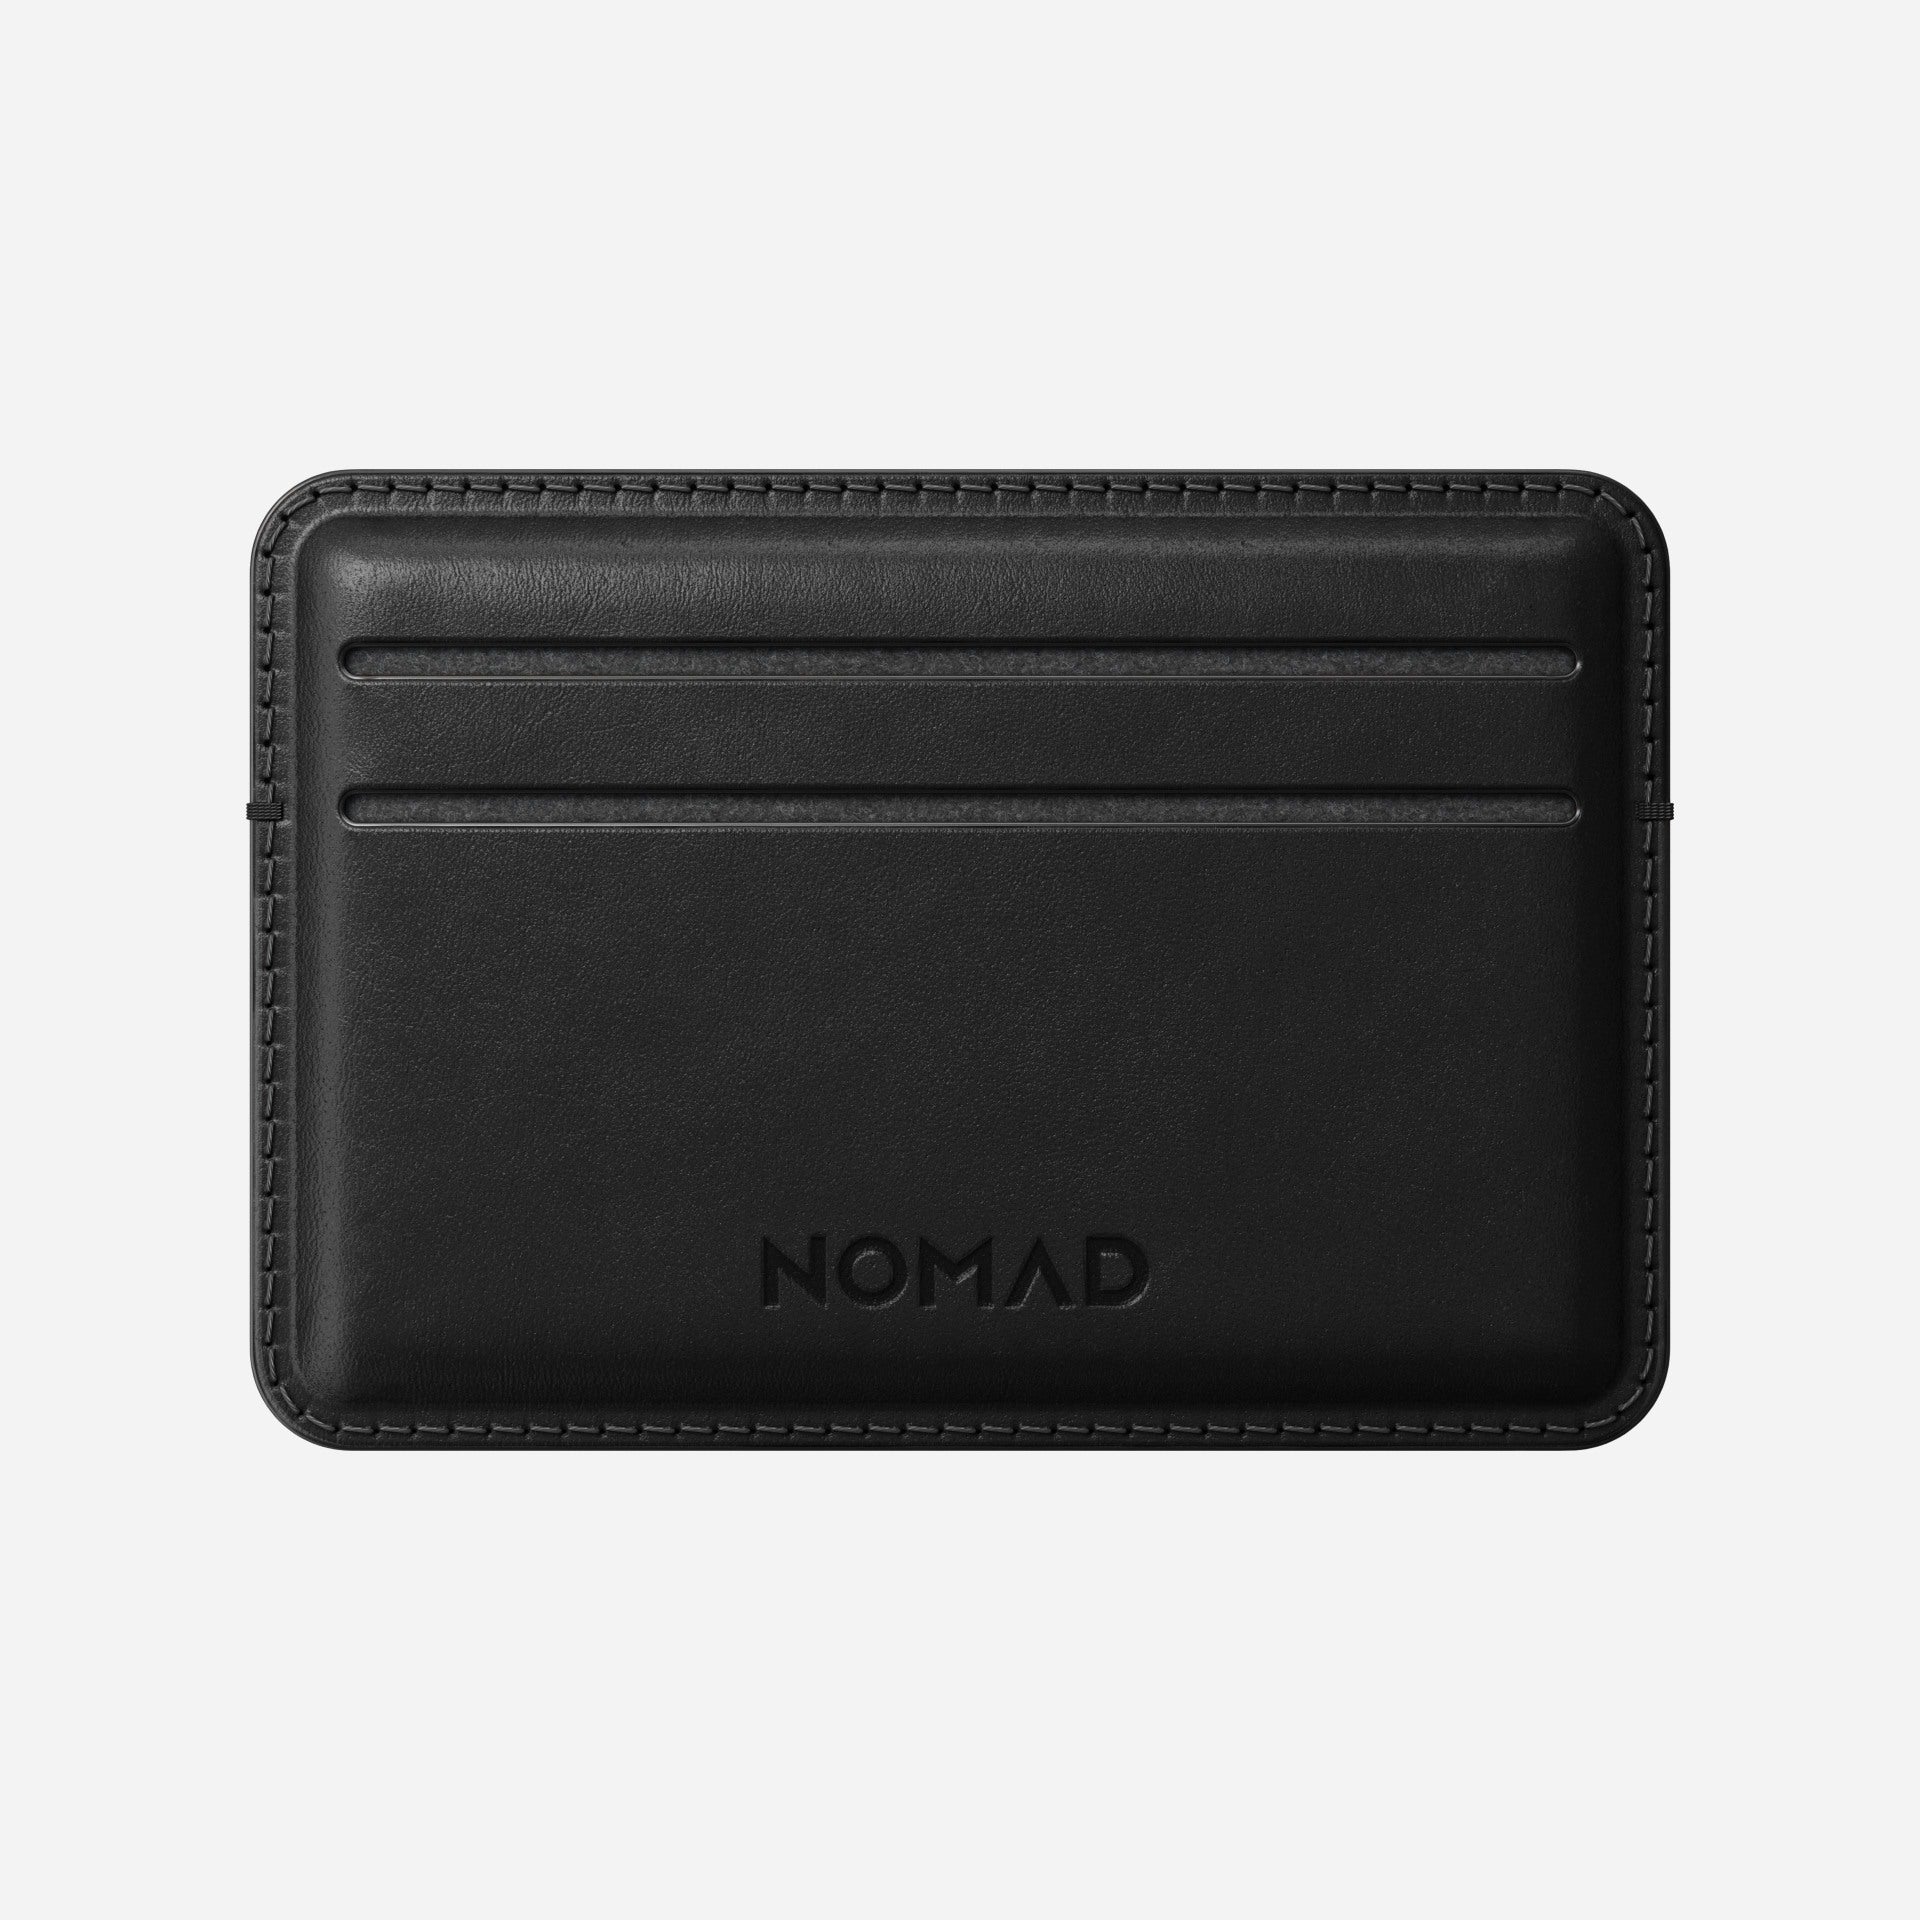 Nomad Card Wallet - Storming Gravity